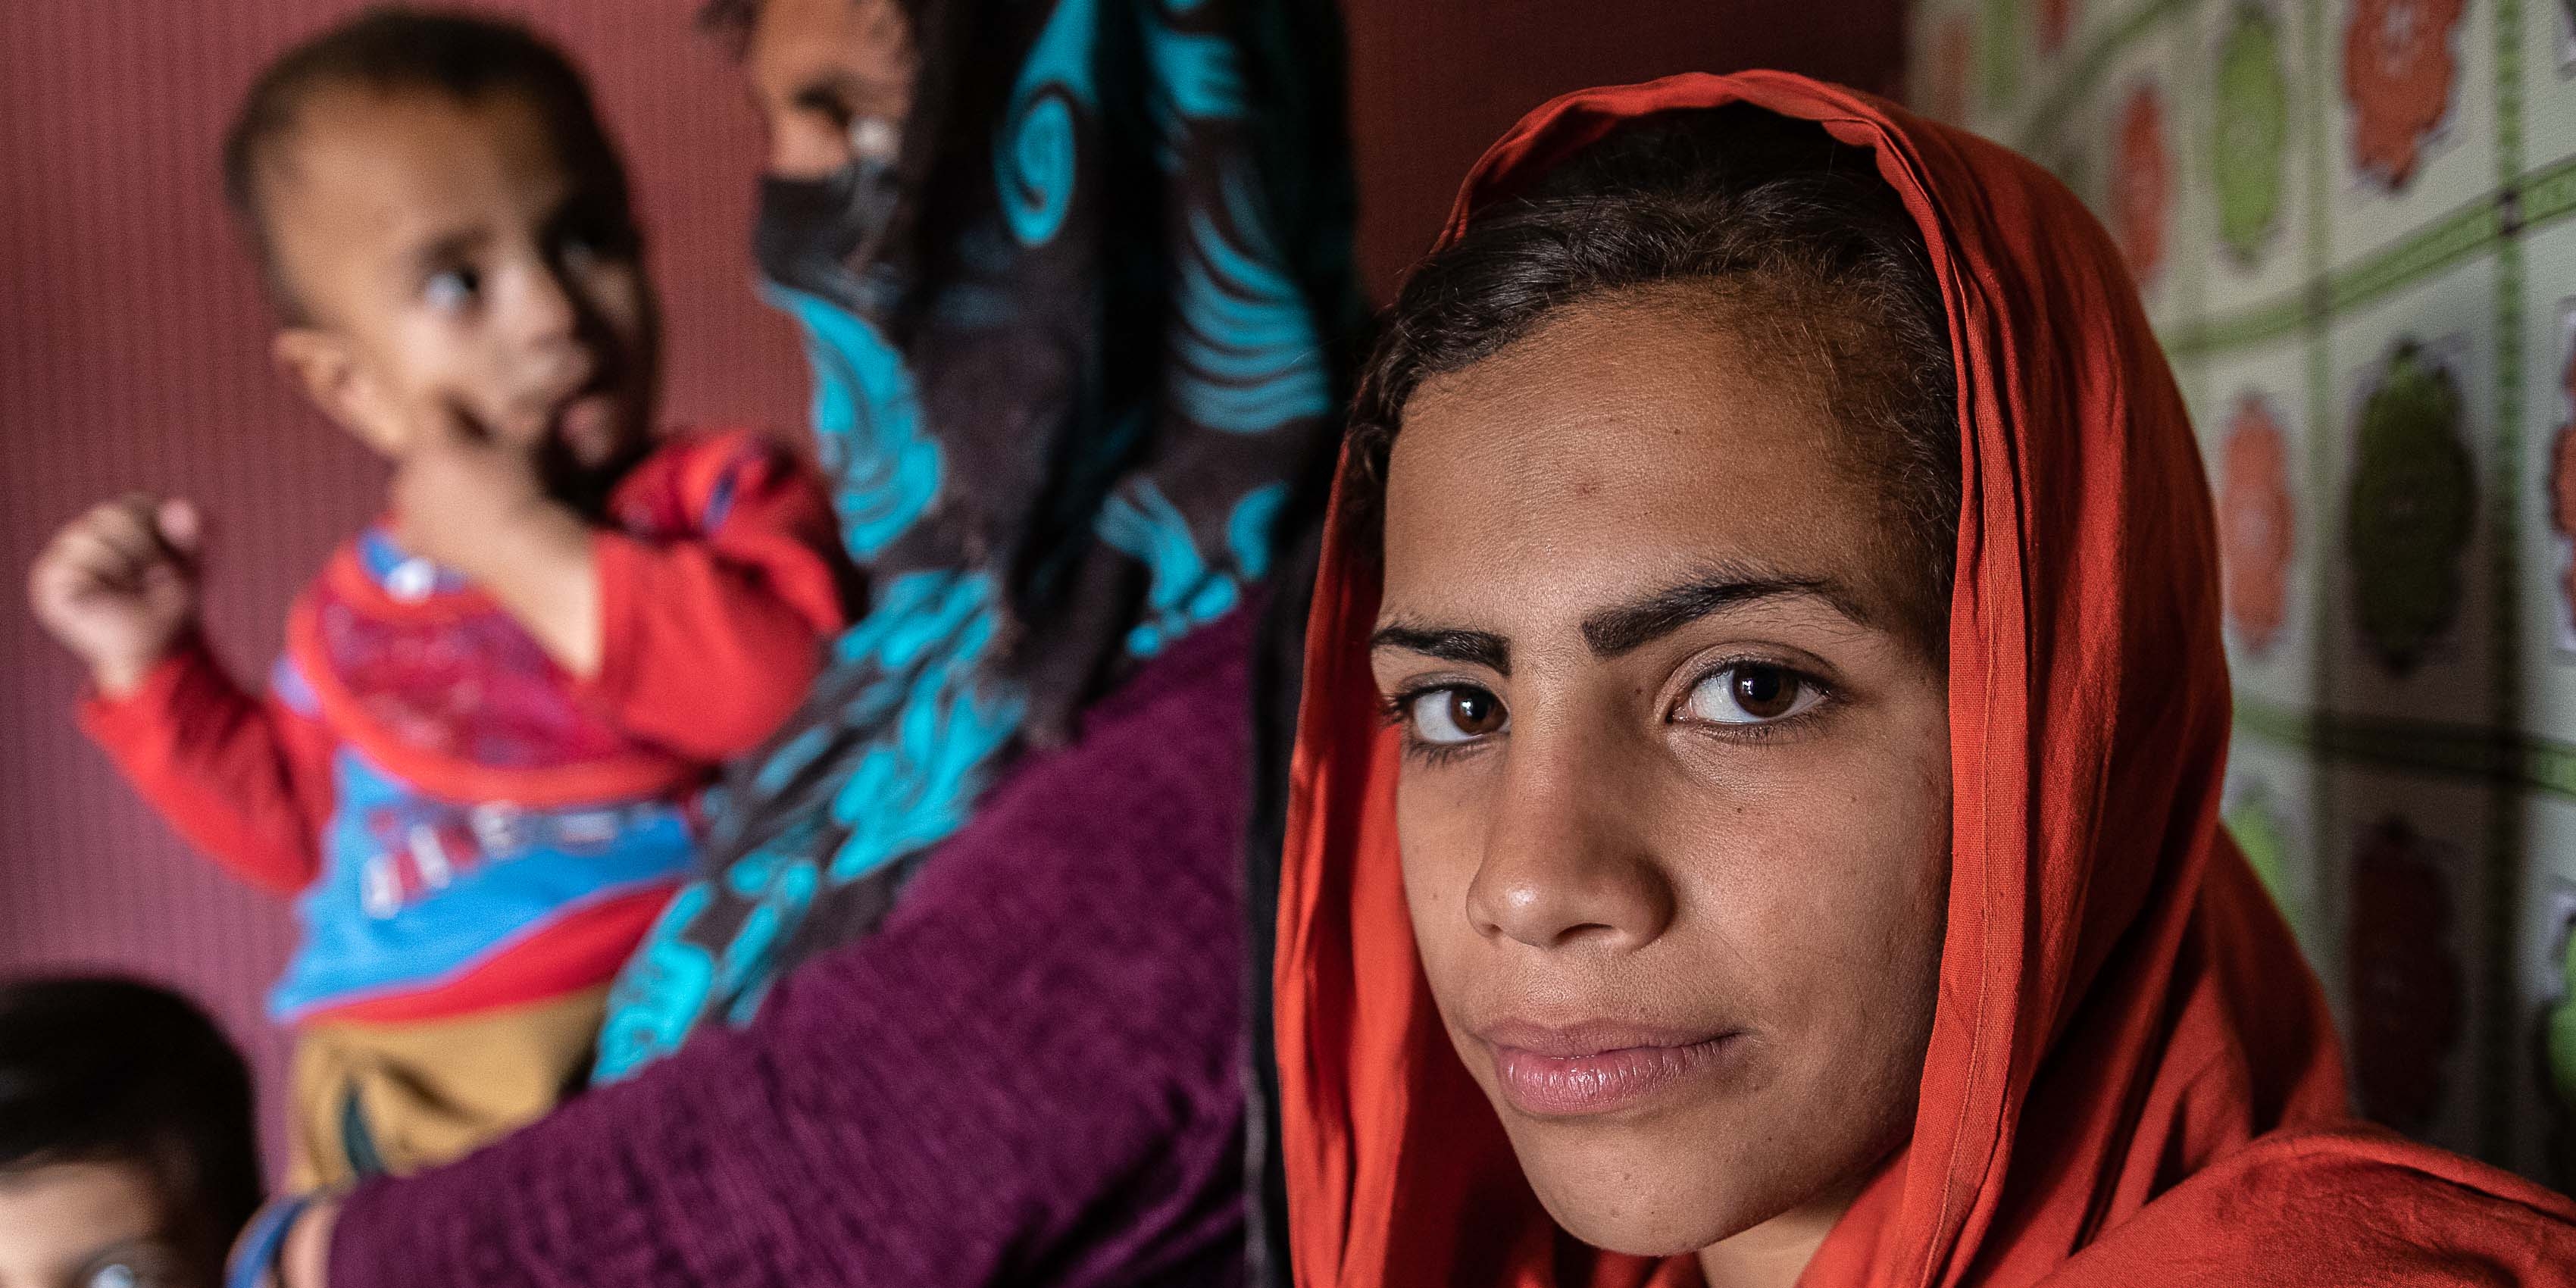 Afghanistan young girl looks to the camera wearing a orange hijab